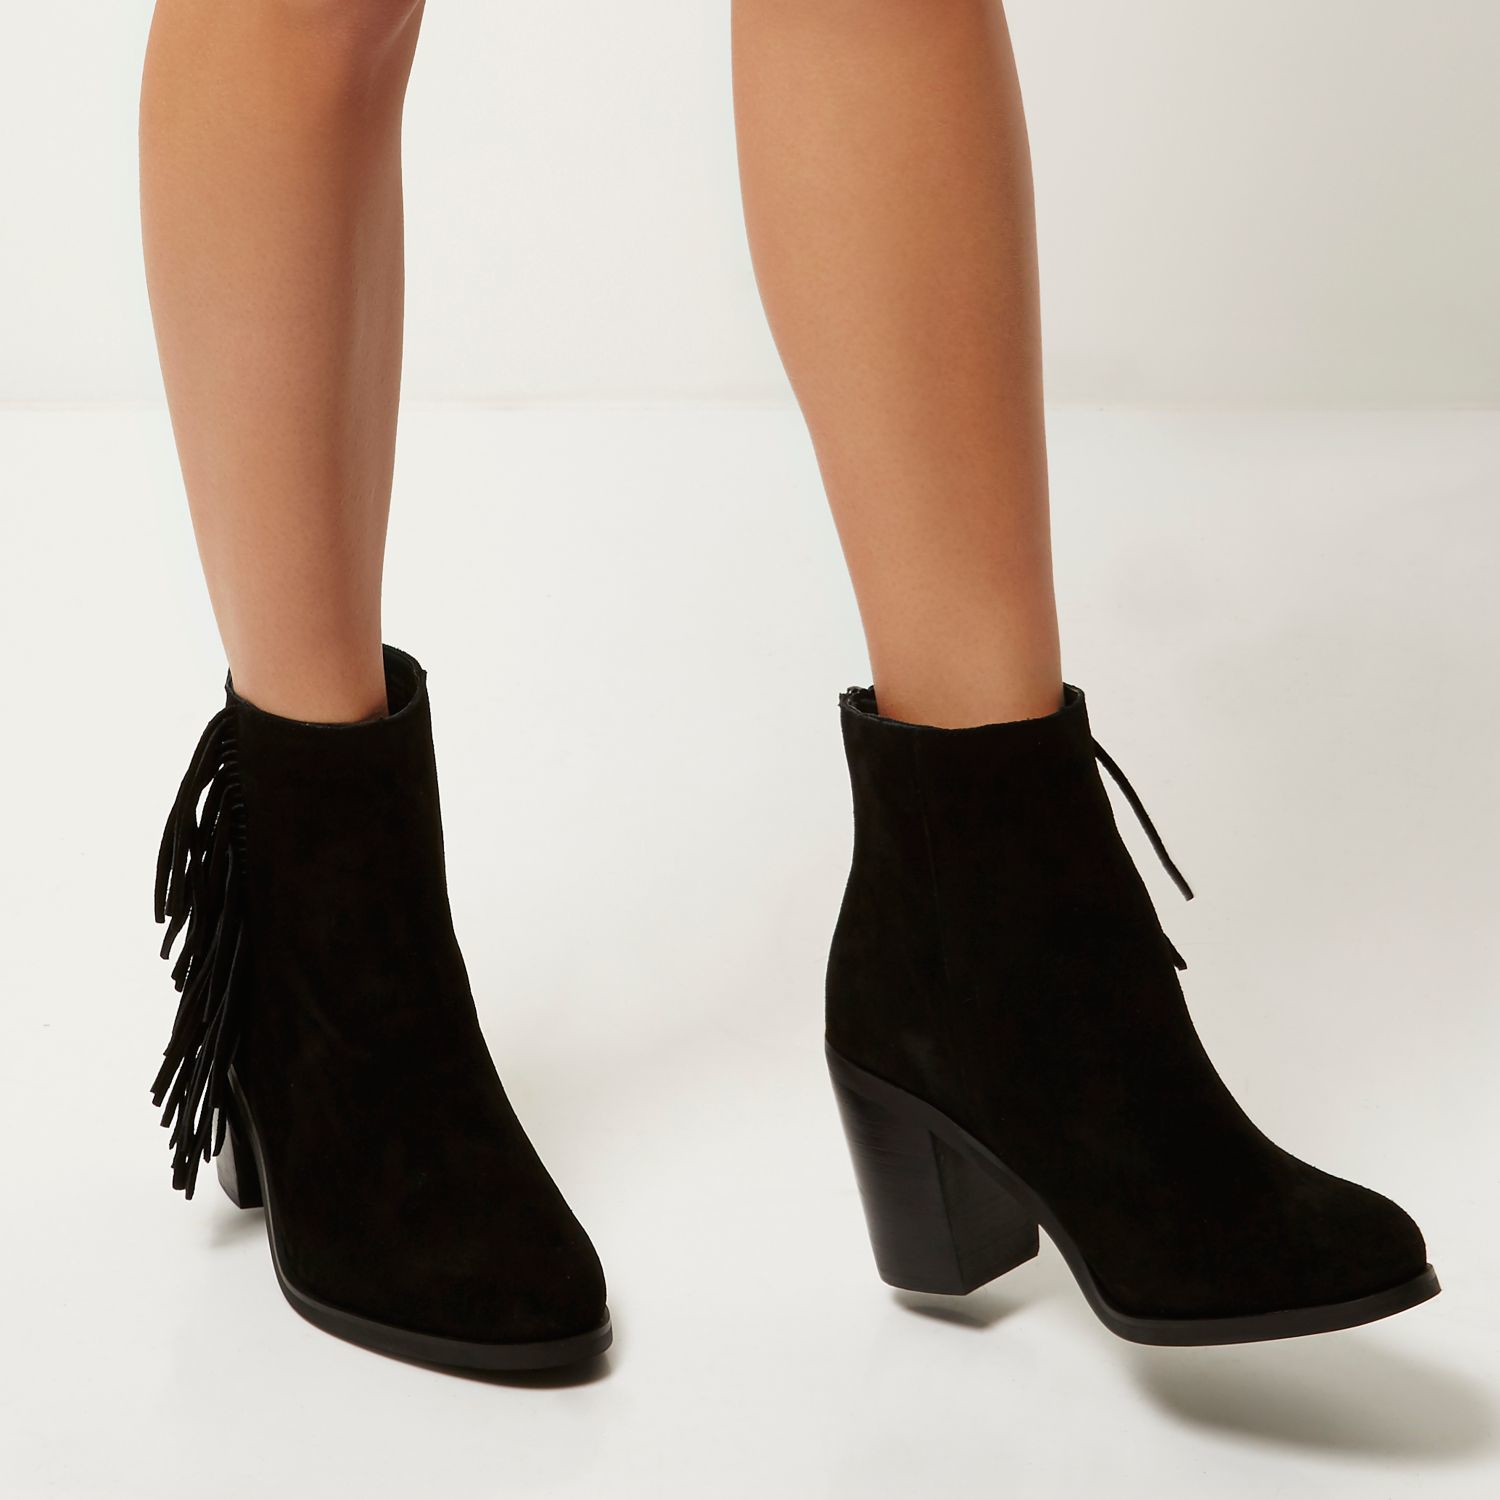 River Island Black Suede Fringed Ankle Boots - Lyst